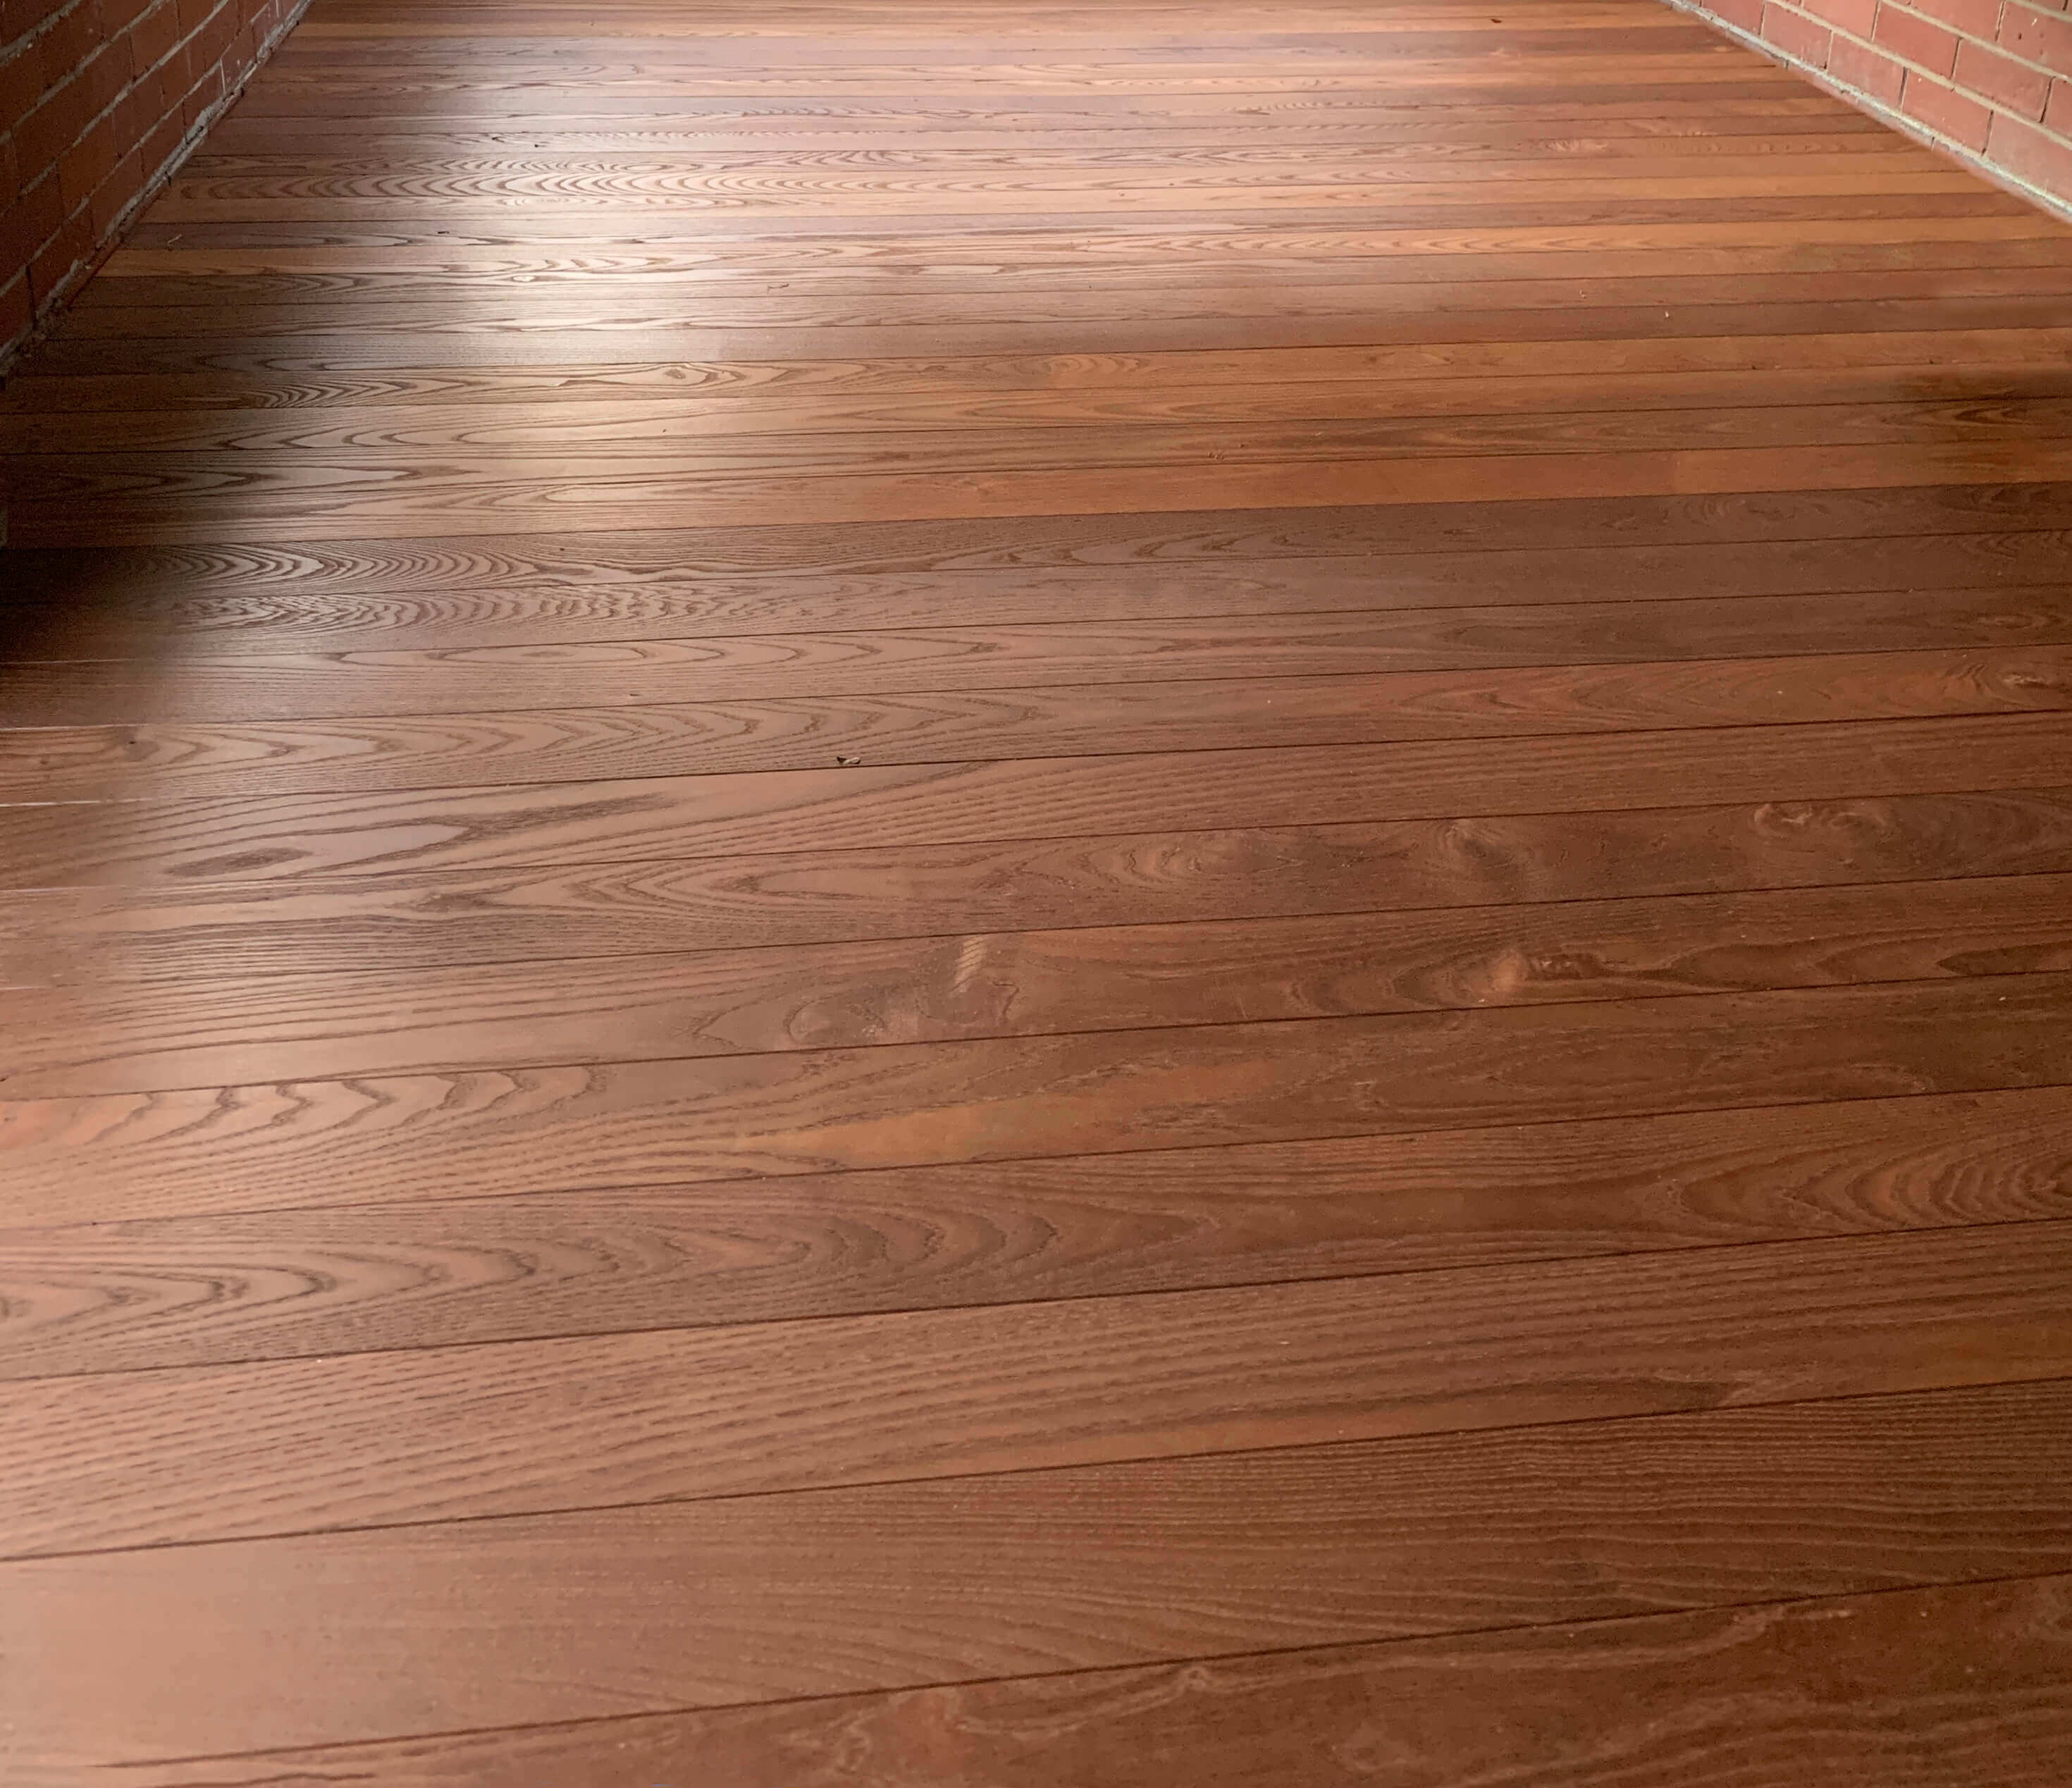 Americana™ Thermally Modified Wood Porch Flooring